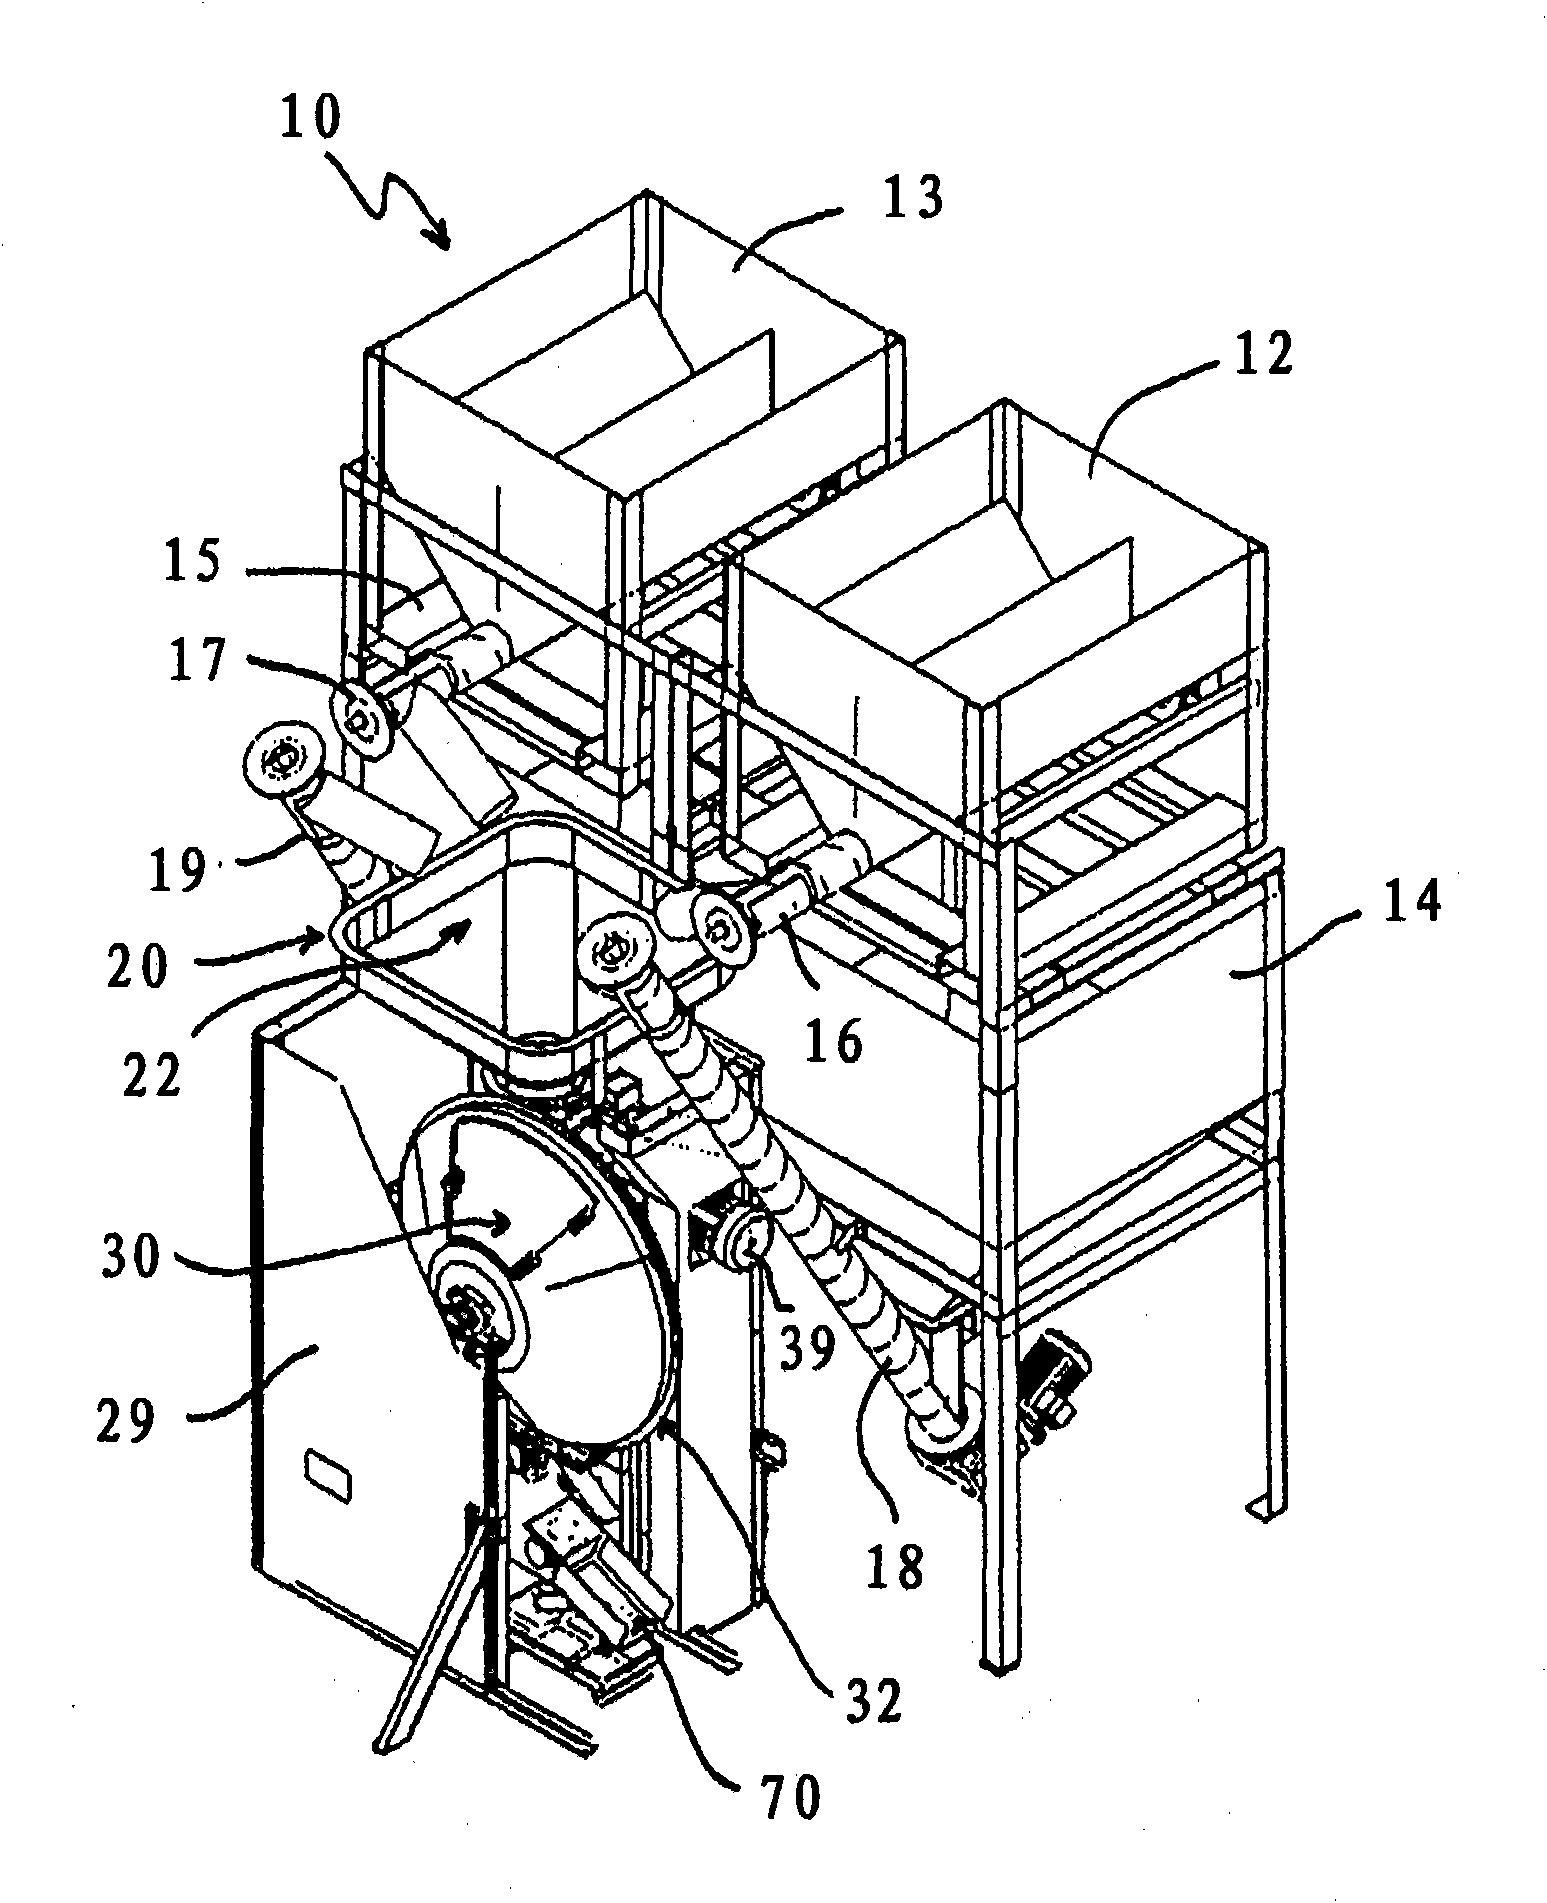 Apparatus and method for metering, mixing and packaging solid particulate material